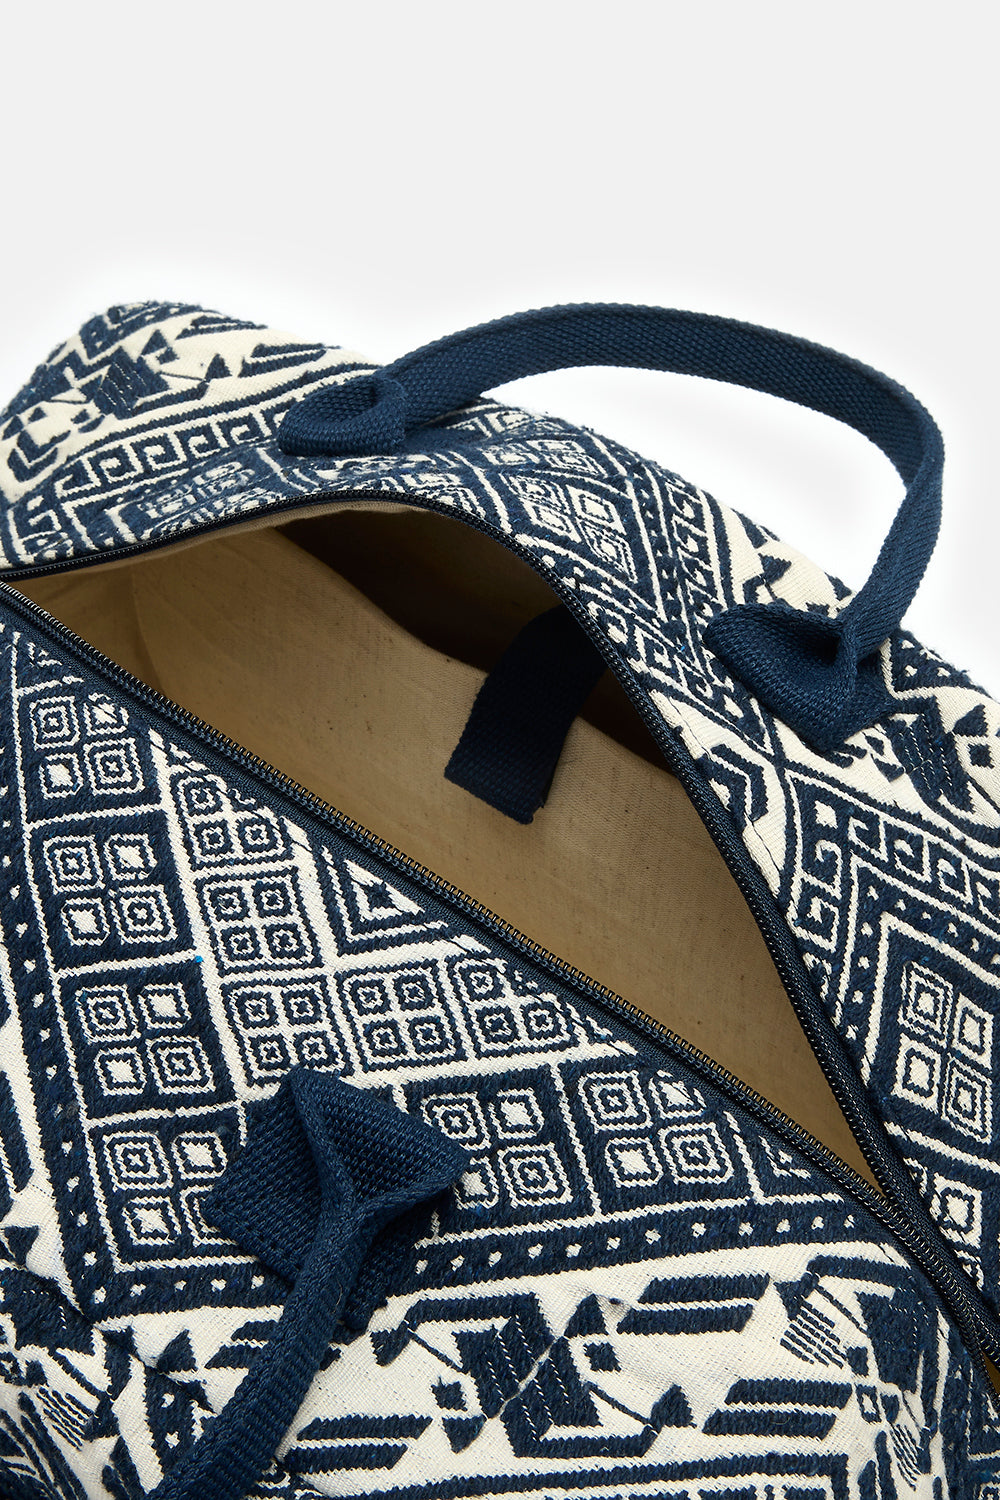 Coppola Weekend Bag: DEADSTOCK FABRIC - Navy Jacquard